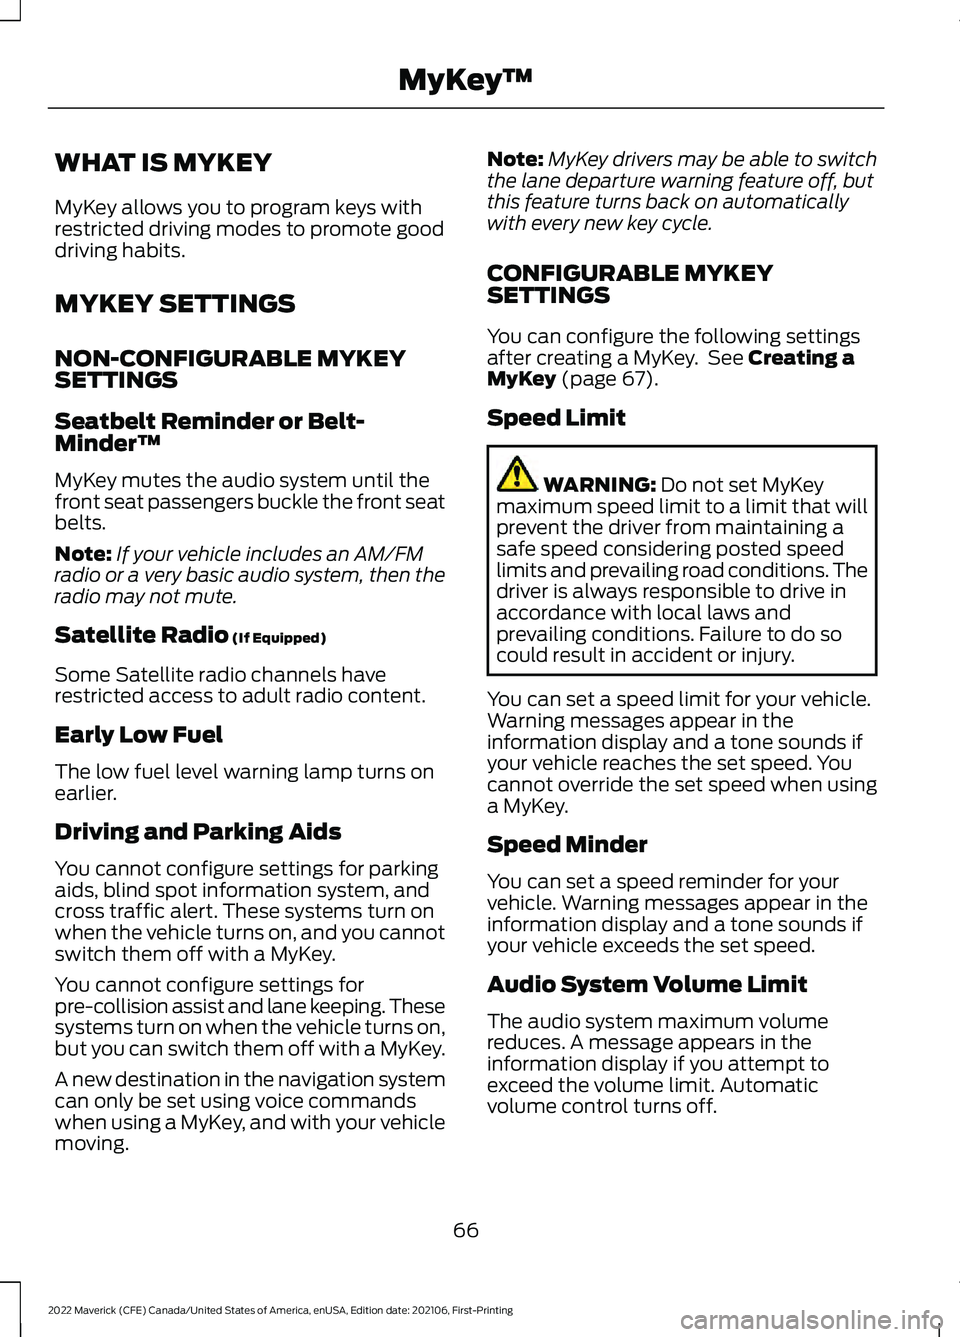 FORD MAVERICK 2022  Owners Manual WHAT IS MYKEY
MyKey allows you to program keys with
restricted driving modes to promote good
driving habits.
MYKEY SETTINGS
NON-CONFIGURABLE MYKEY
SETTINGS
Seatbelt Reminder or Belt-
Minder™
MyKey m